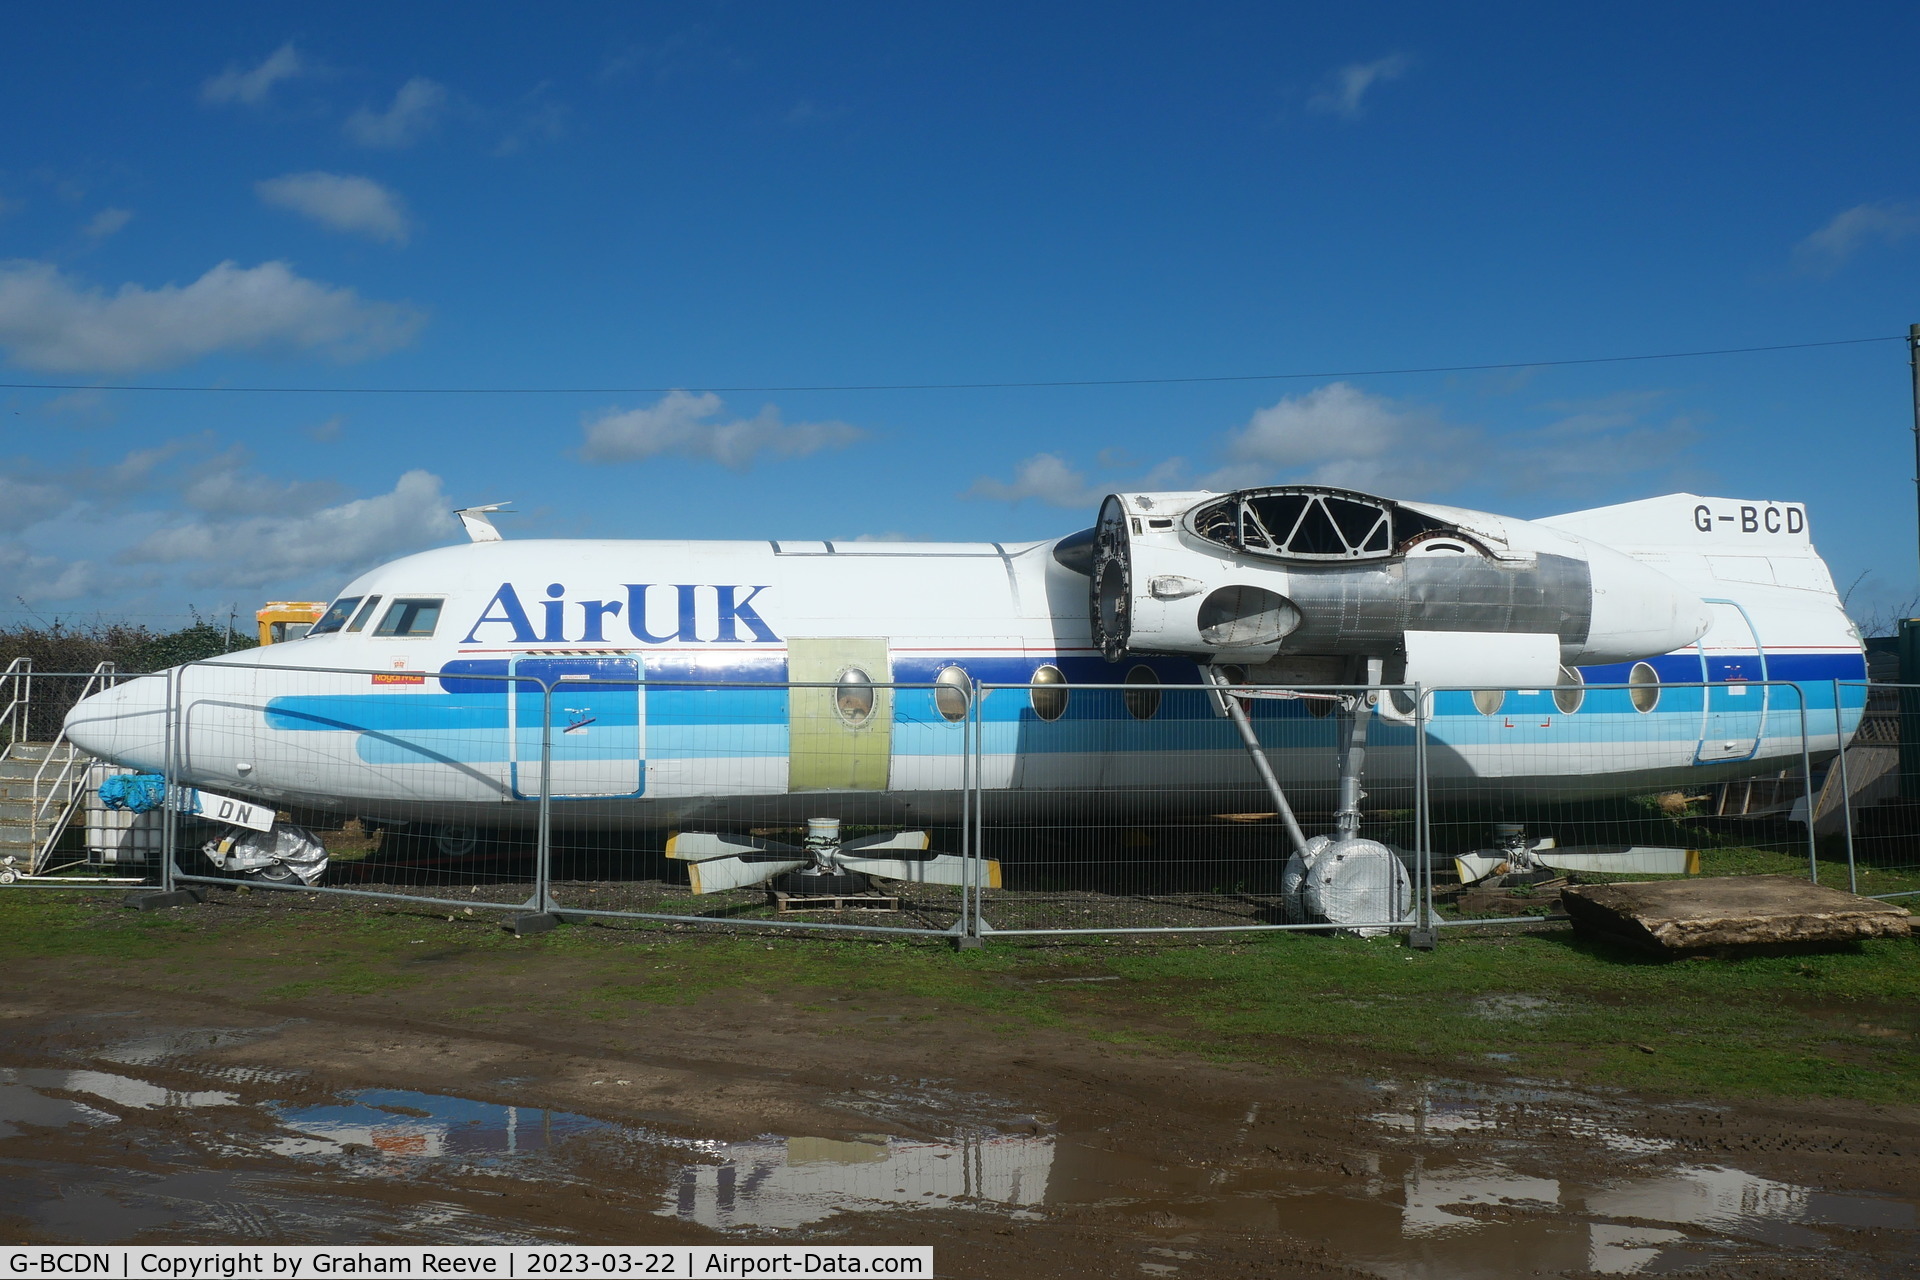 G-BCDN, 1963 Fokker F-27-200 Friendship C/N 10201, On display at the 